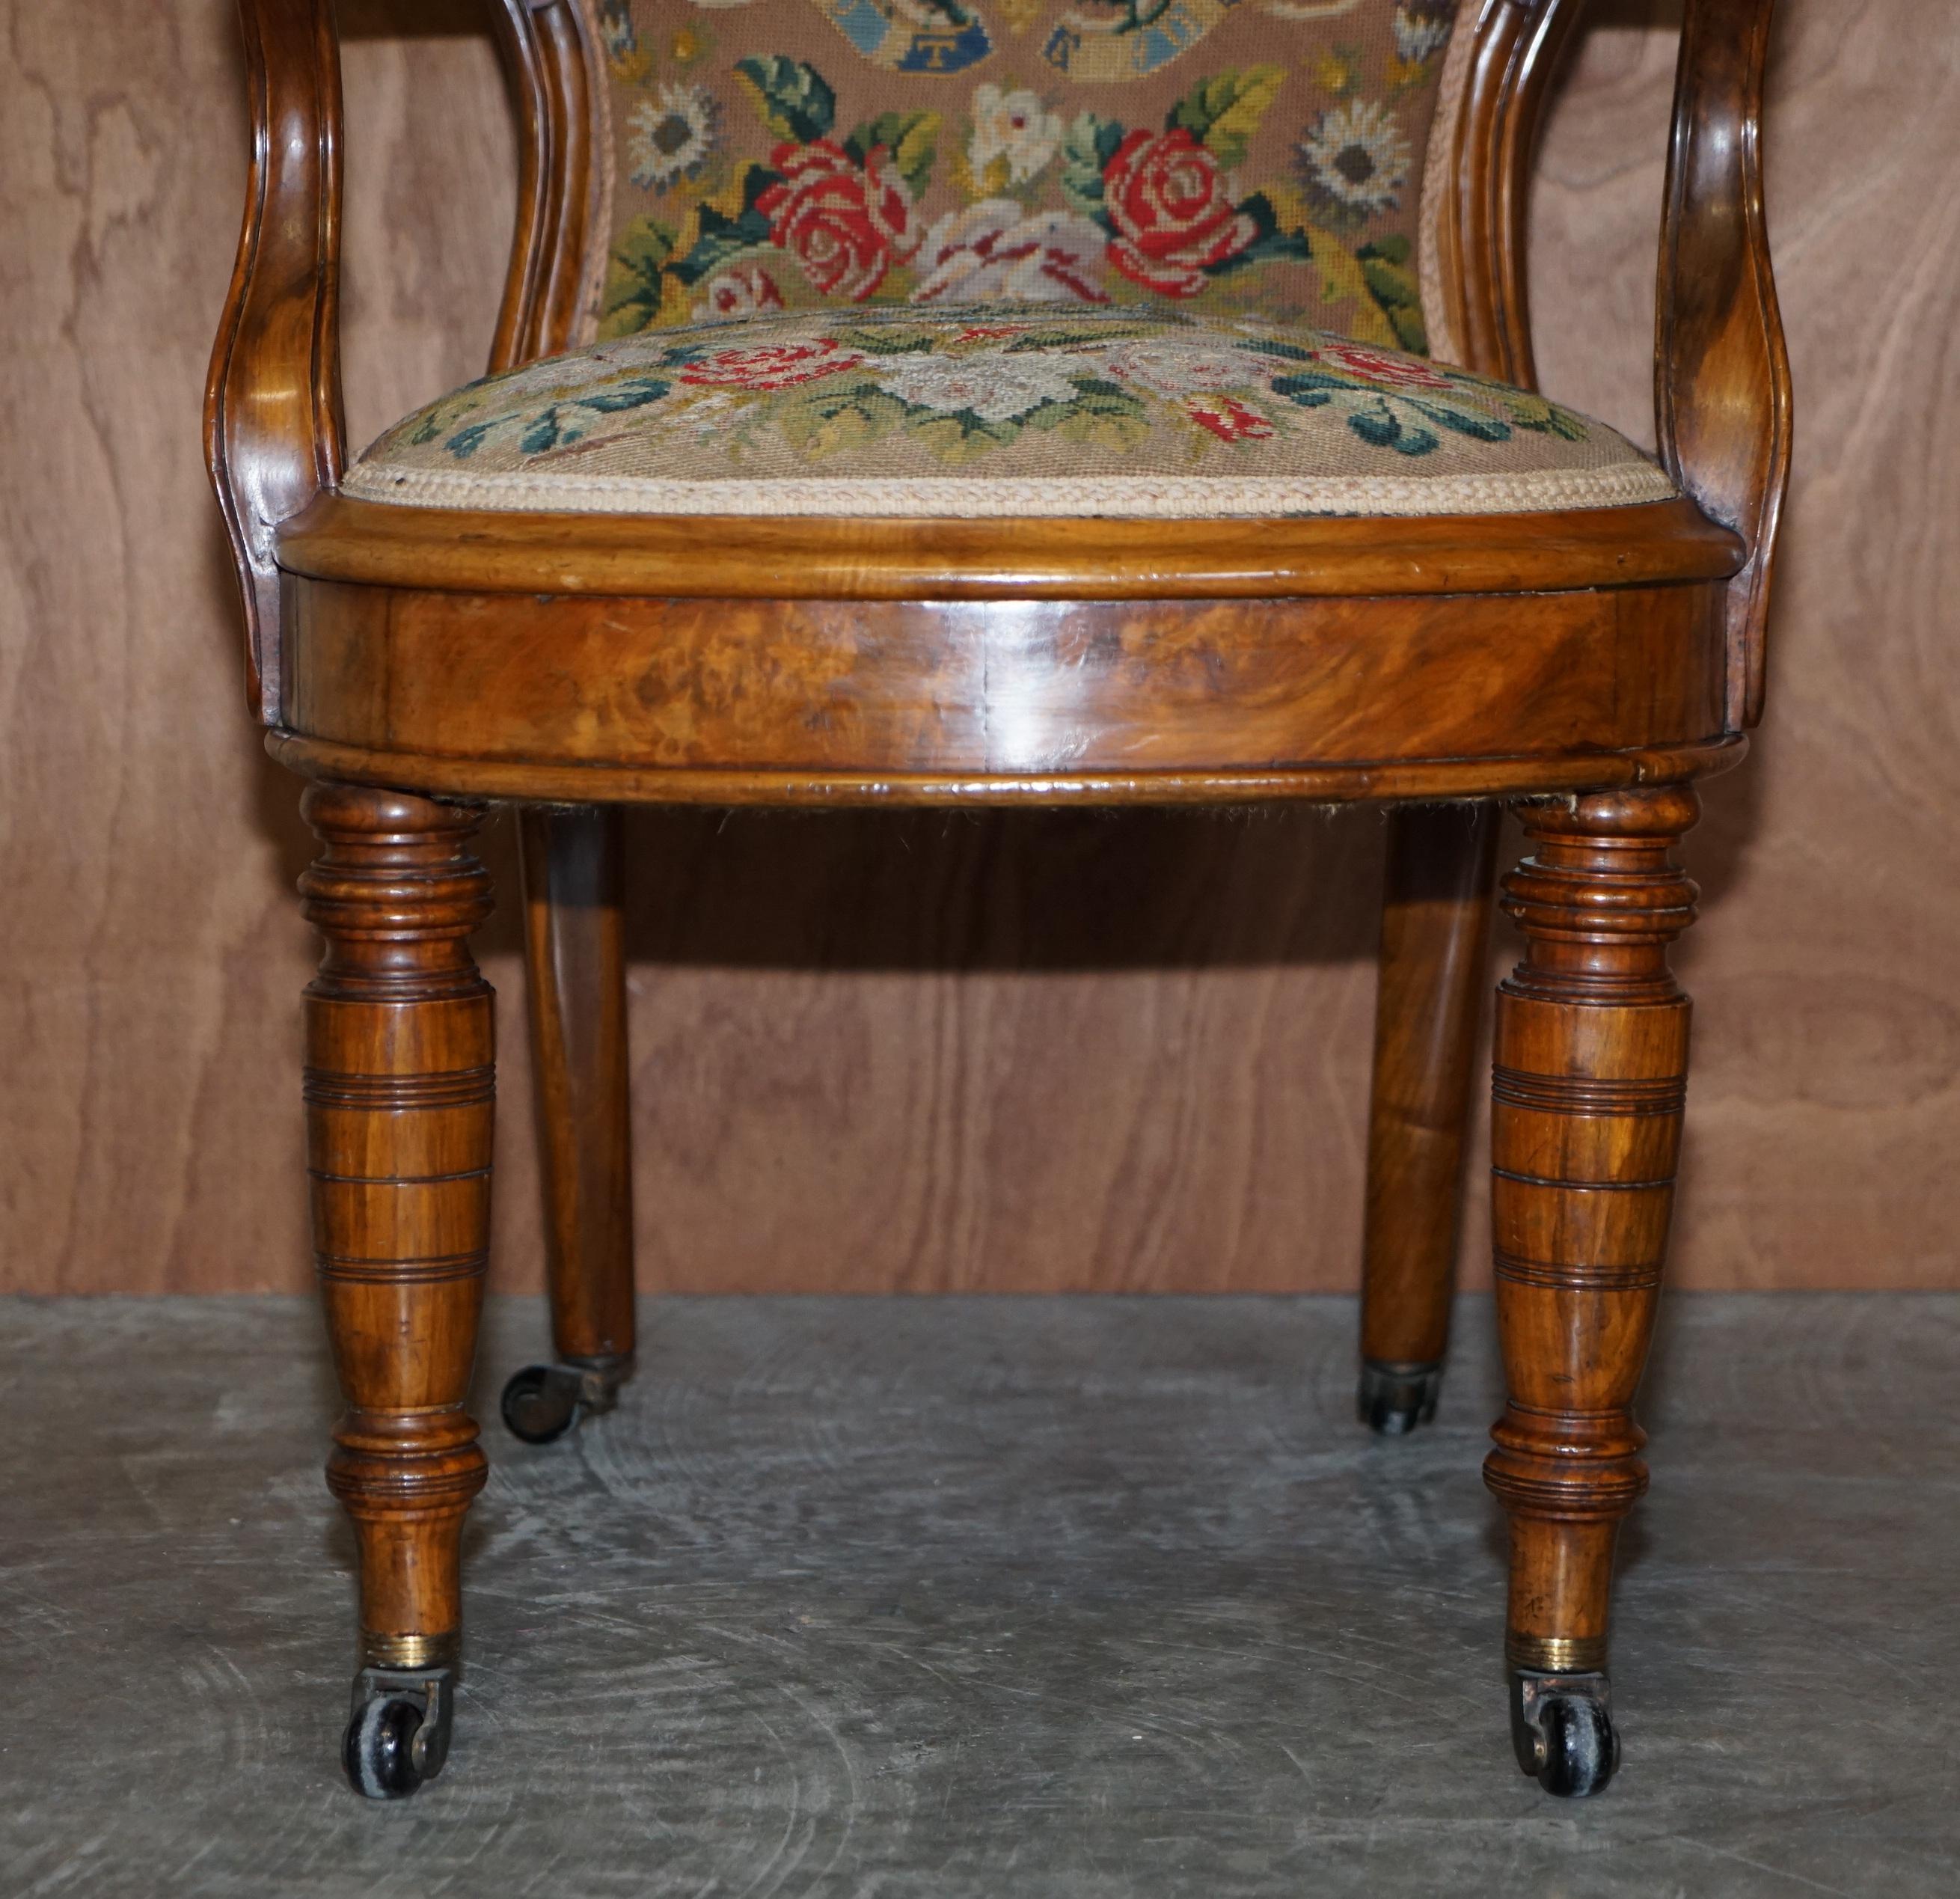 Antique circa 1860 Victorian Burr Walnut Armchair Royal Coat of Arms Armorial For Sale 4